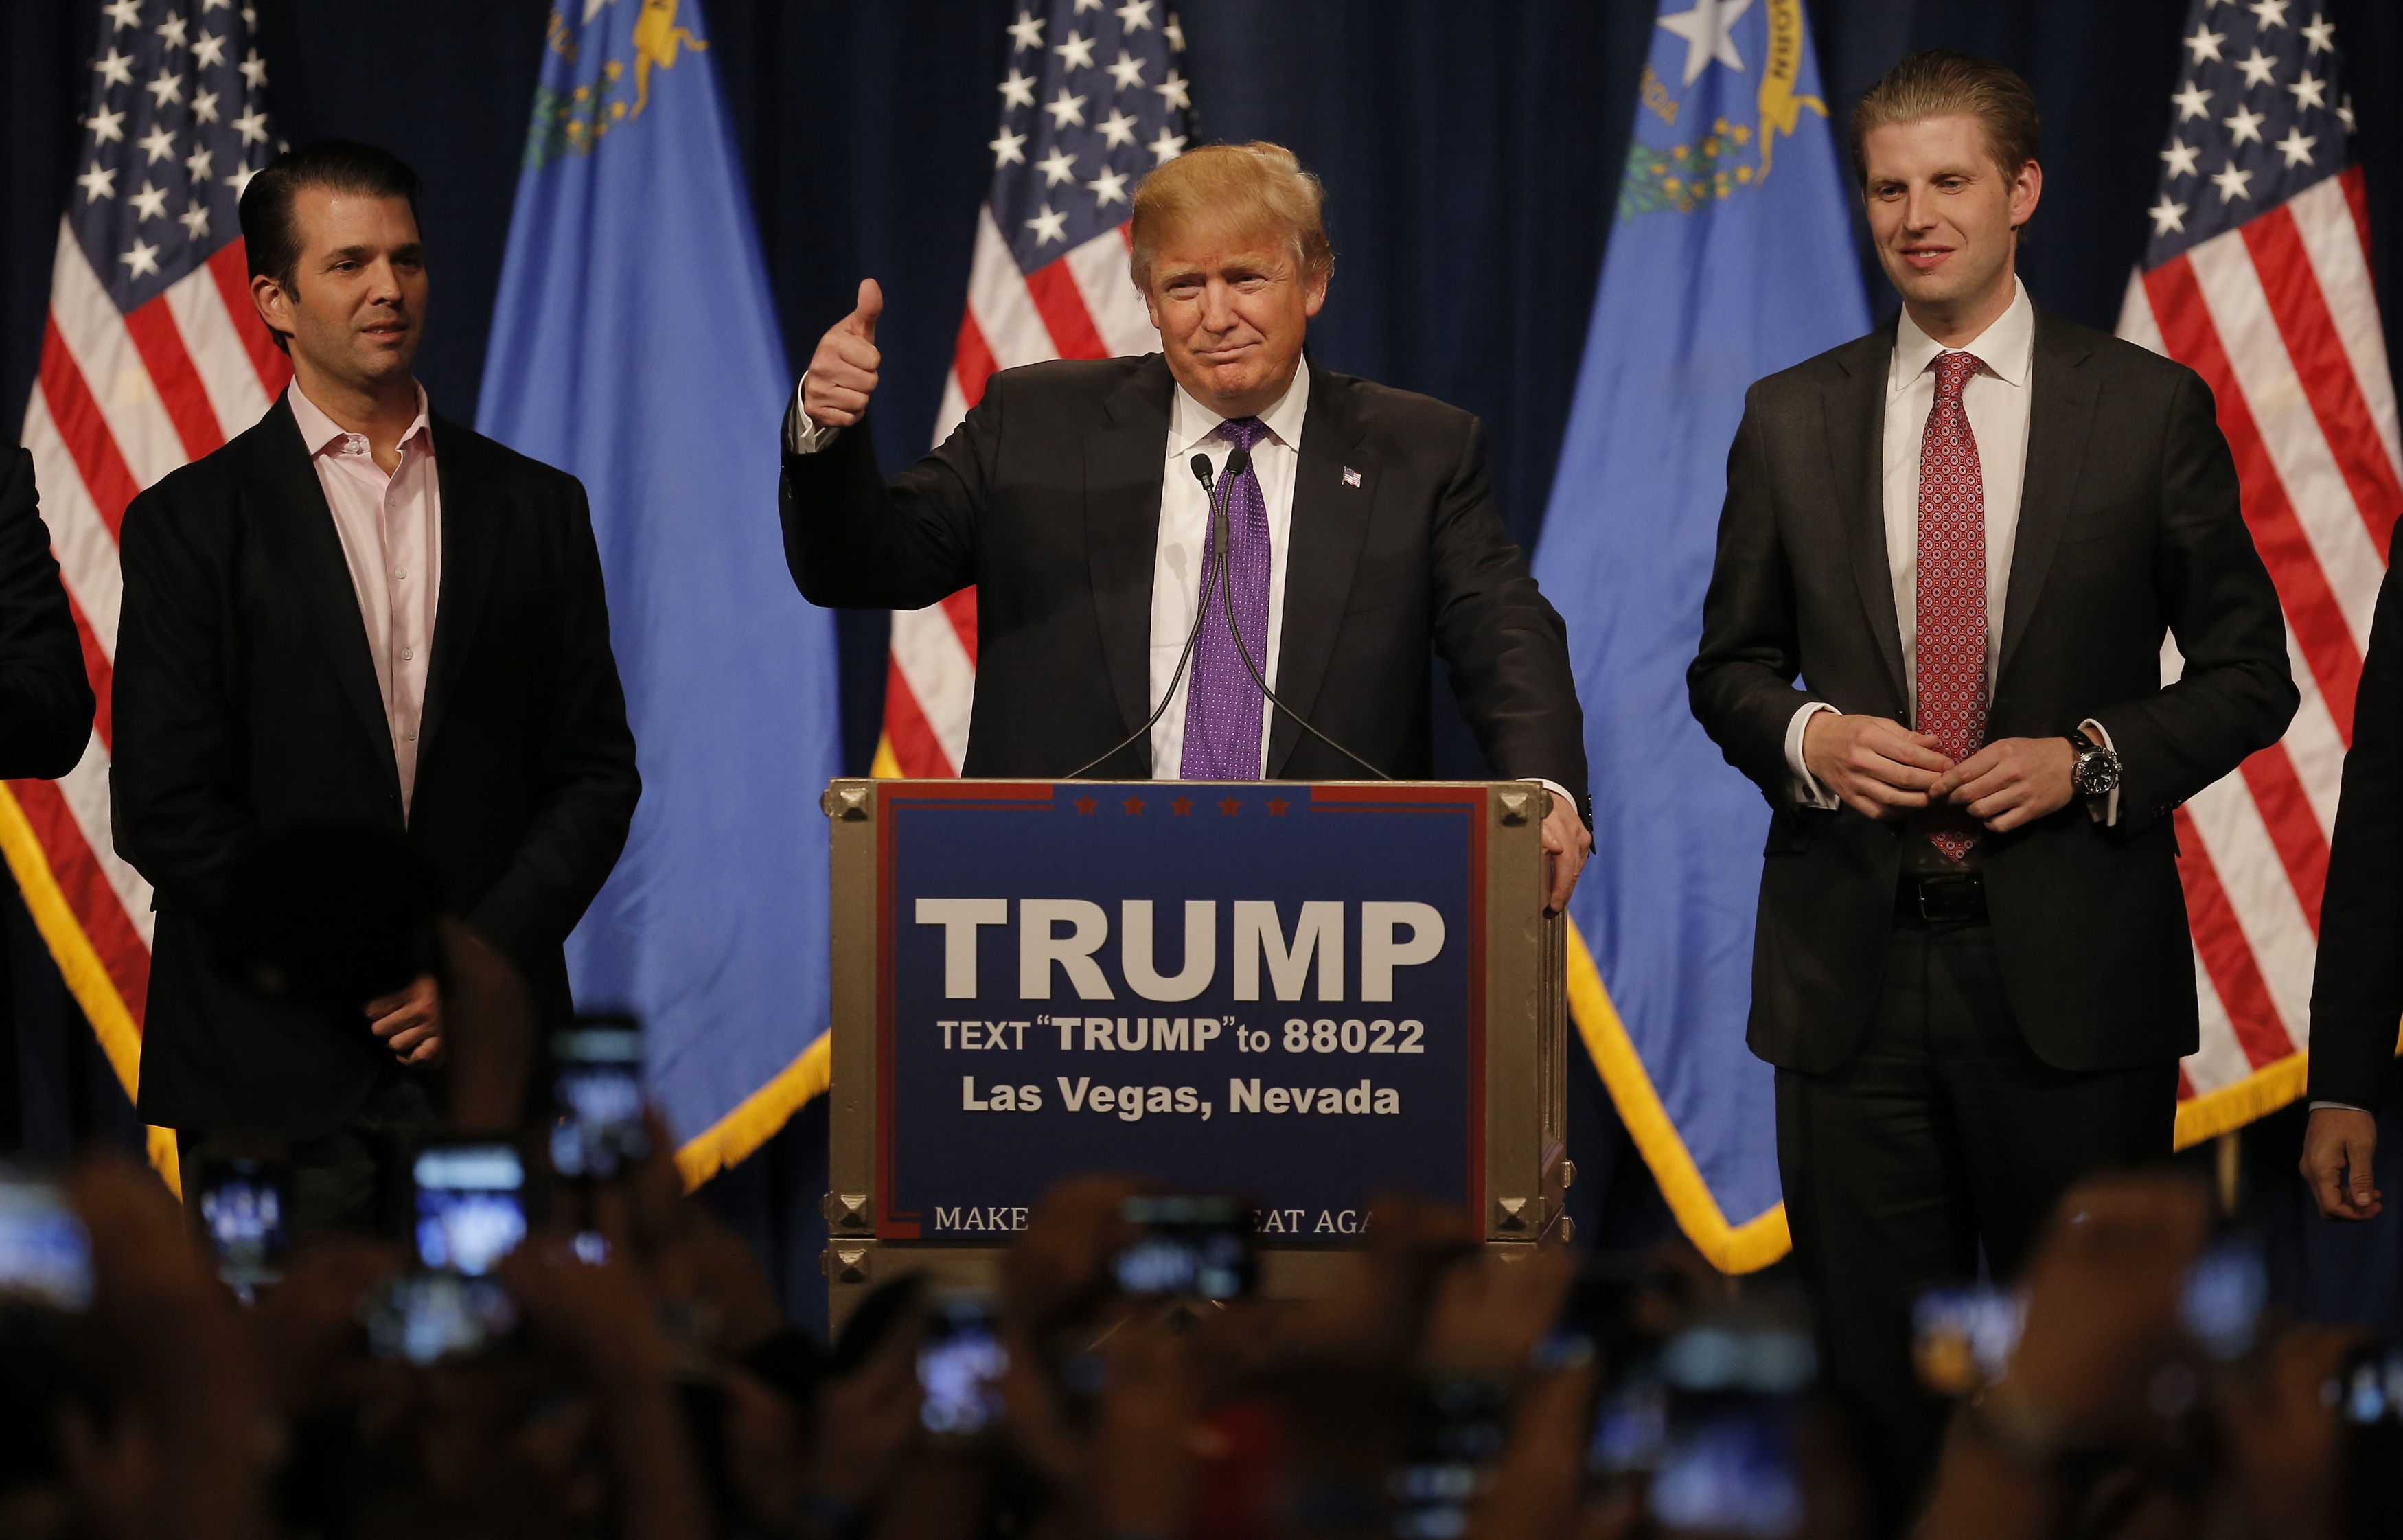 Republican U.S. presidential candidate Donald Trump is flanked by his sons Donald Trump Jr. (L) and Eric Trump (R) as he addresses supporters after being declared by the television networks as the winner in the Nevada Repulican caucuses at his caucus night rally in Las Vegas, Nevada, February 23, 2016. REUTERS/Jim Young - RTX28AV6